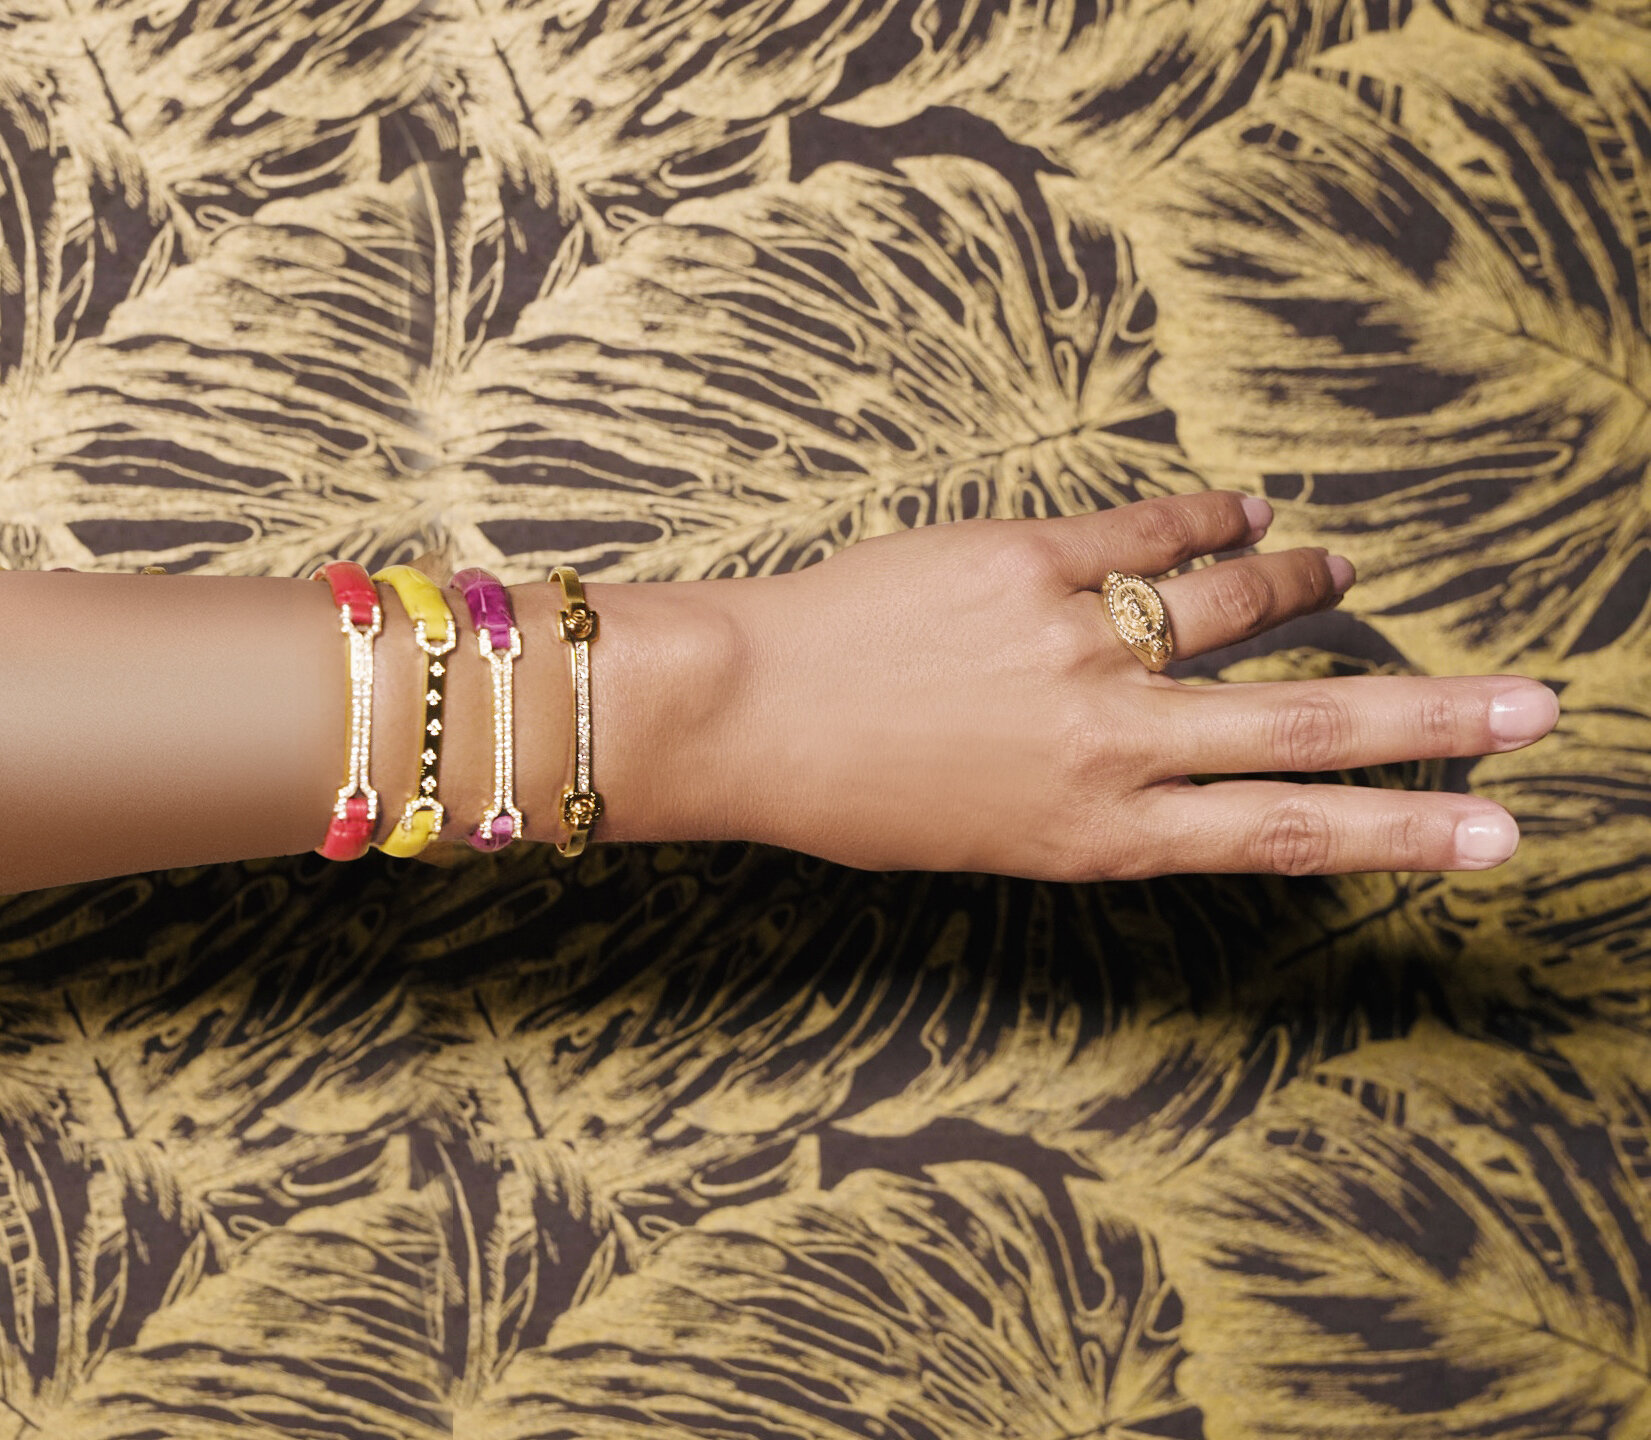 Matthia’s & Claire 18K Gold and Diamond Skin Bracelets - Design Your Own, starting at $4,200